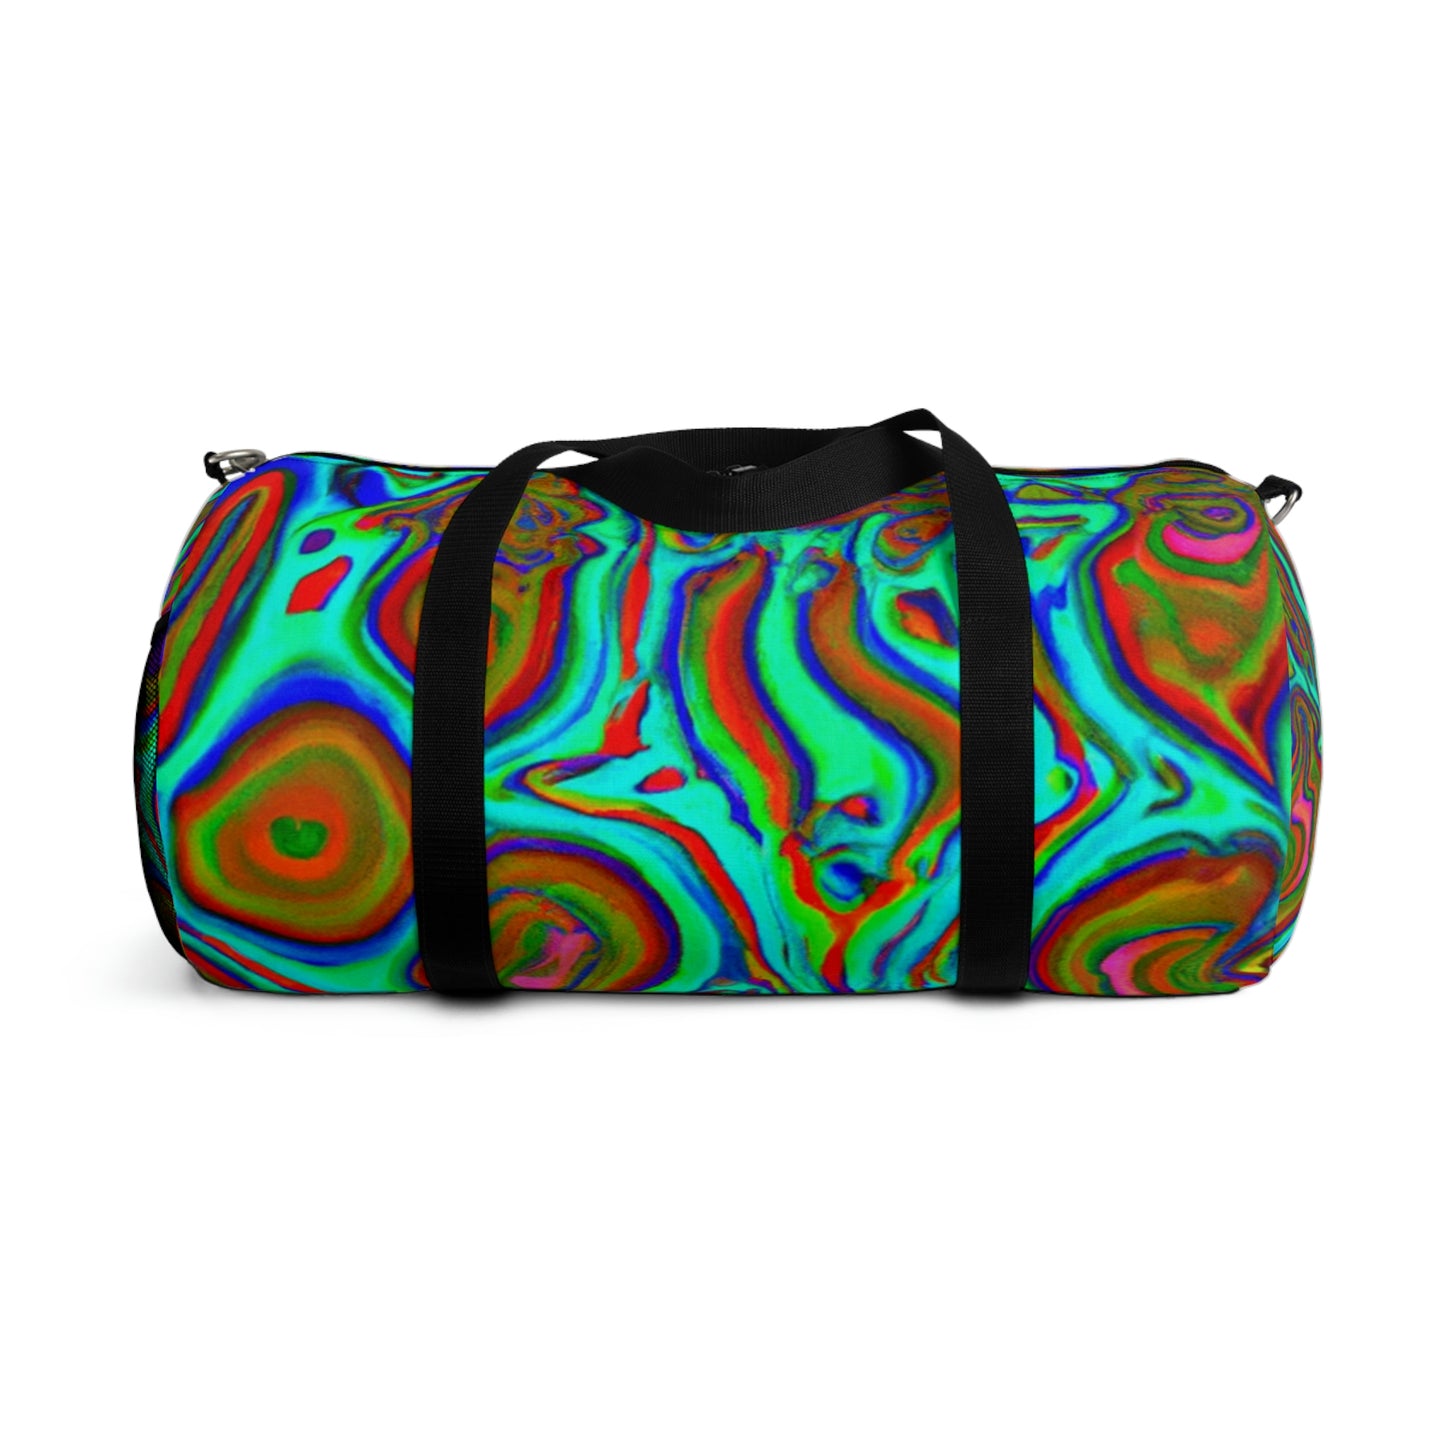 Dubois Couture - Psychedelic Duffel Bag